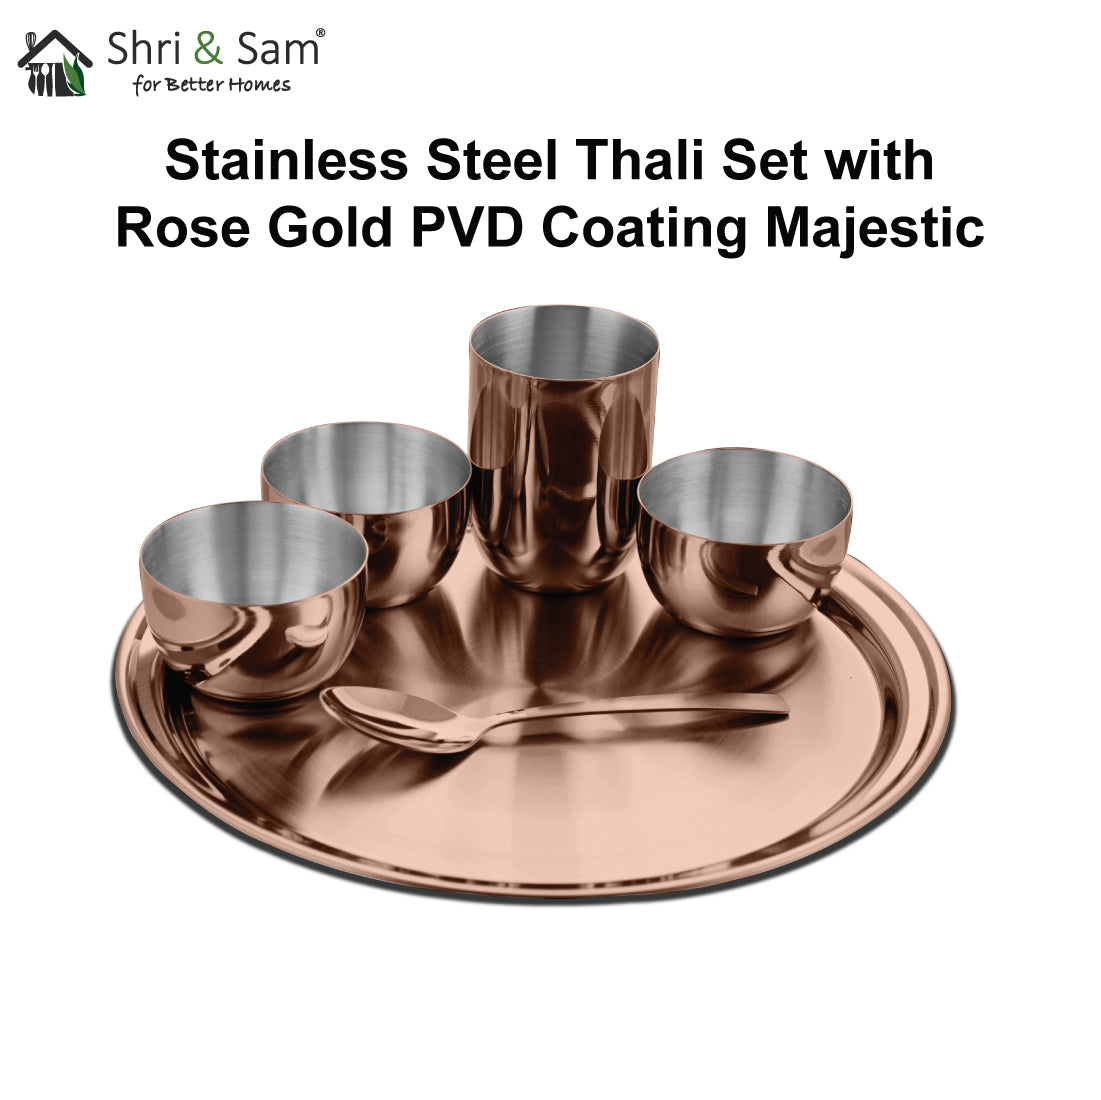 Stainless Steel Thali Set with Rose Gold PVD Coating Majestic